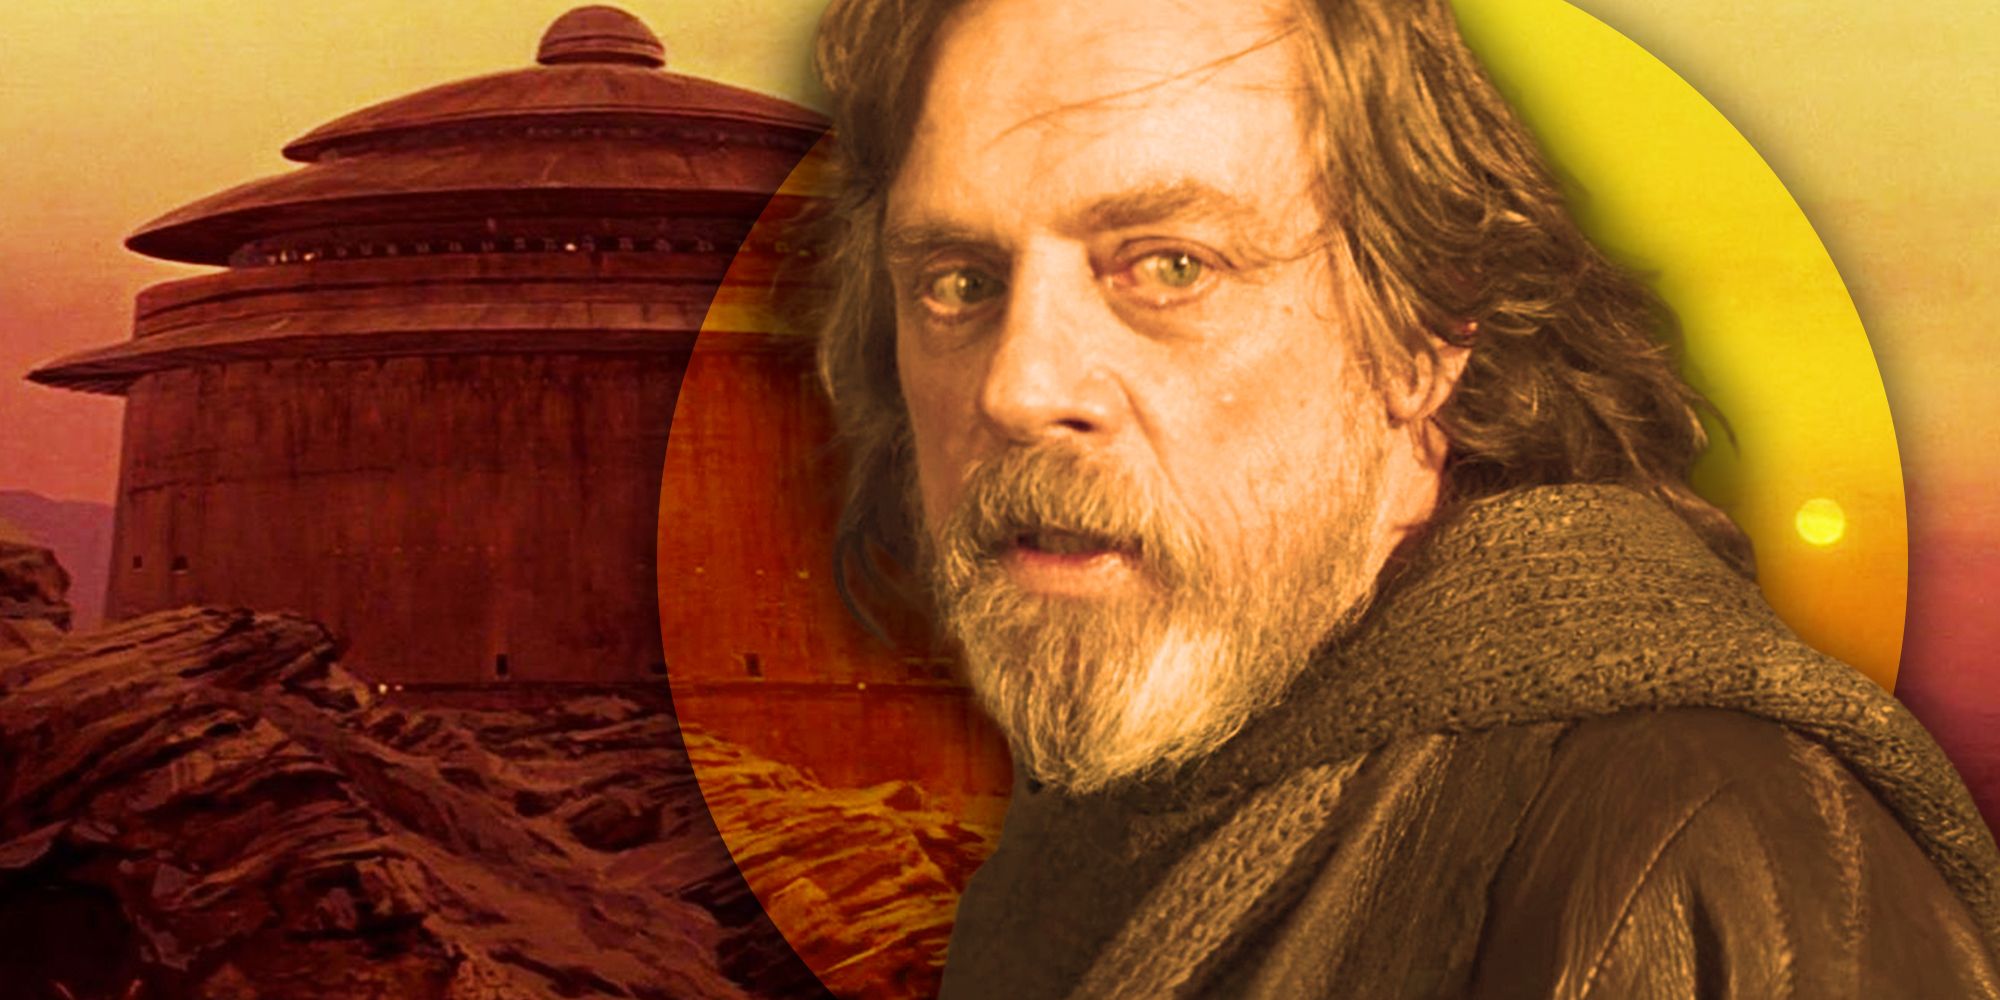 Mark Hamill's Luke Skywalker in The Last Jedi, superimposed over Jabba the Hutt's palace on Tatooine